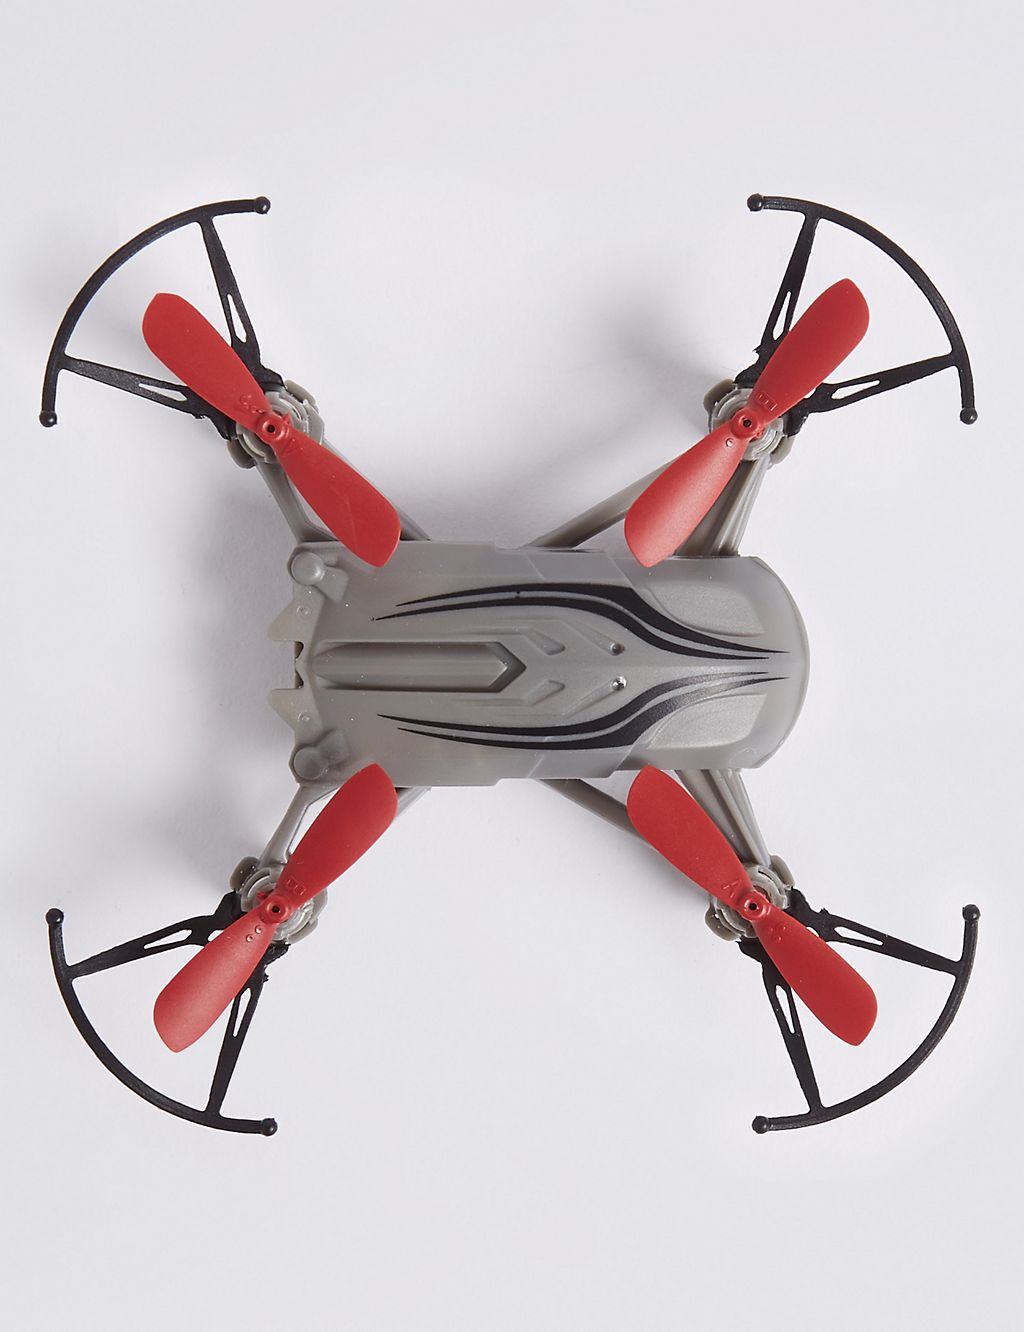 USB Drone 4 of 6